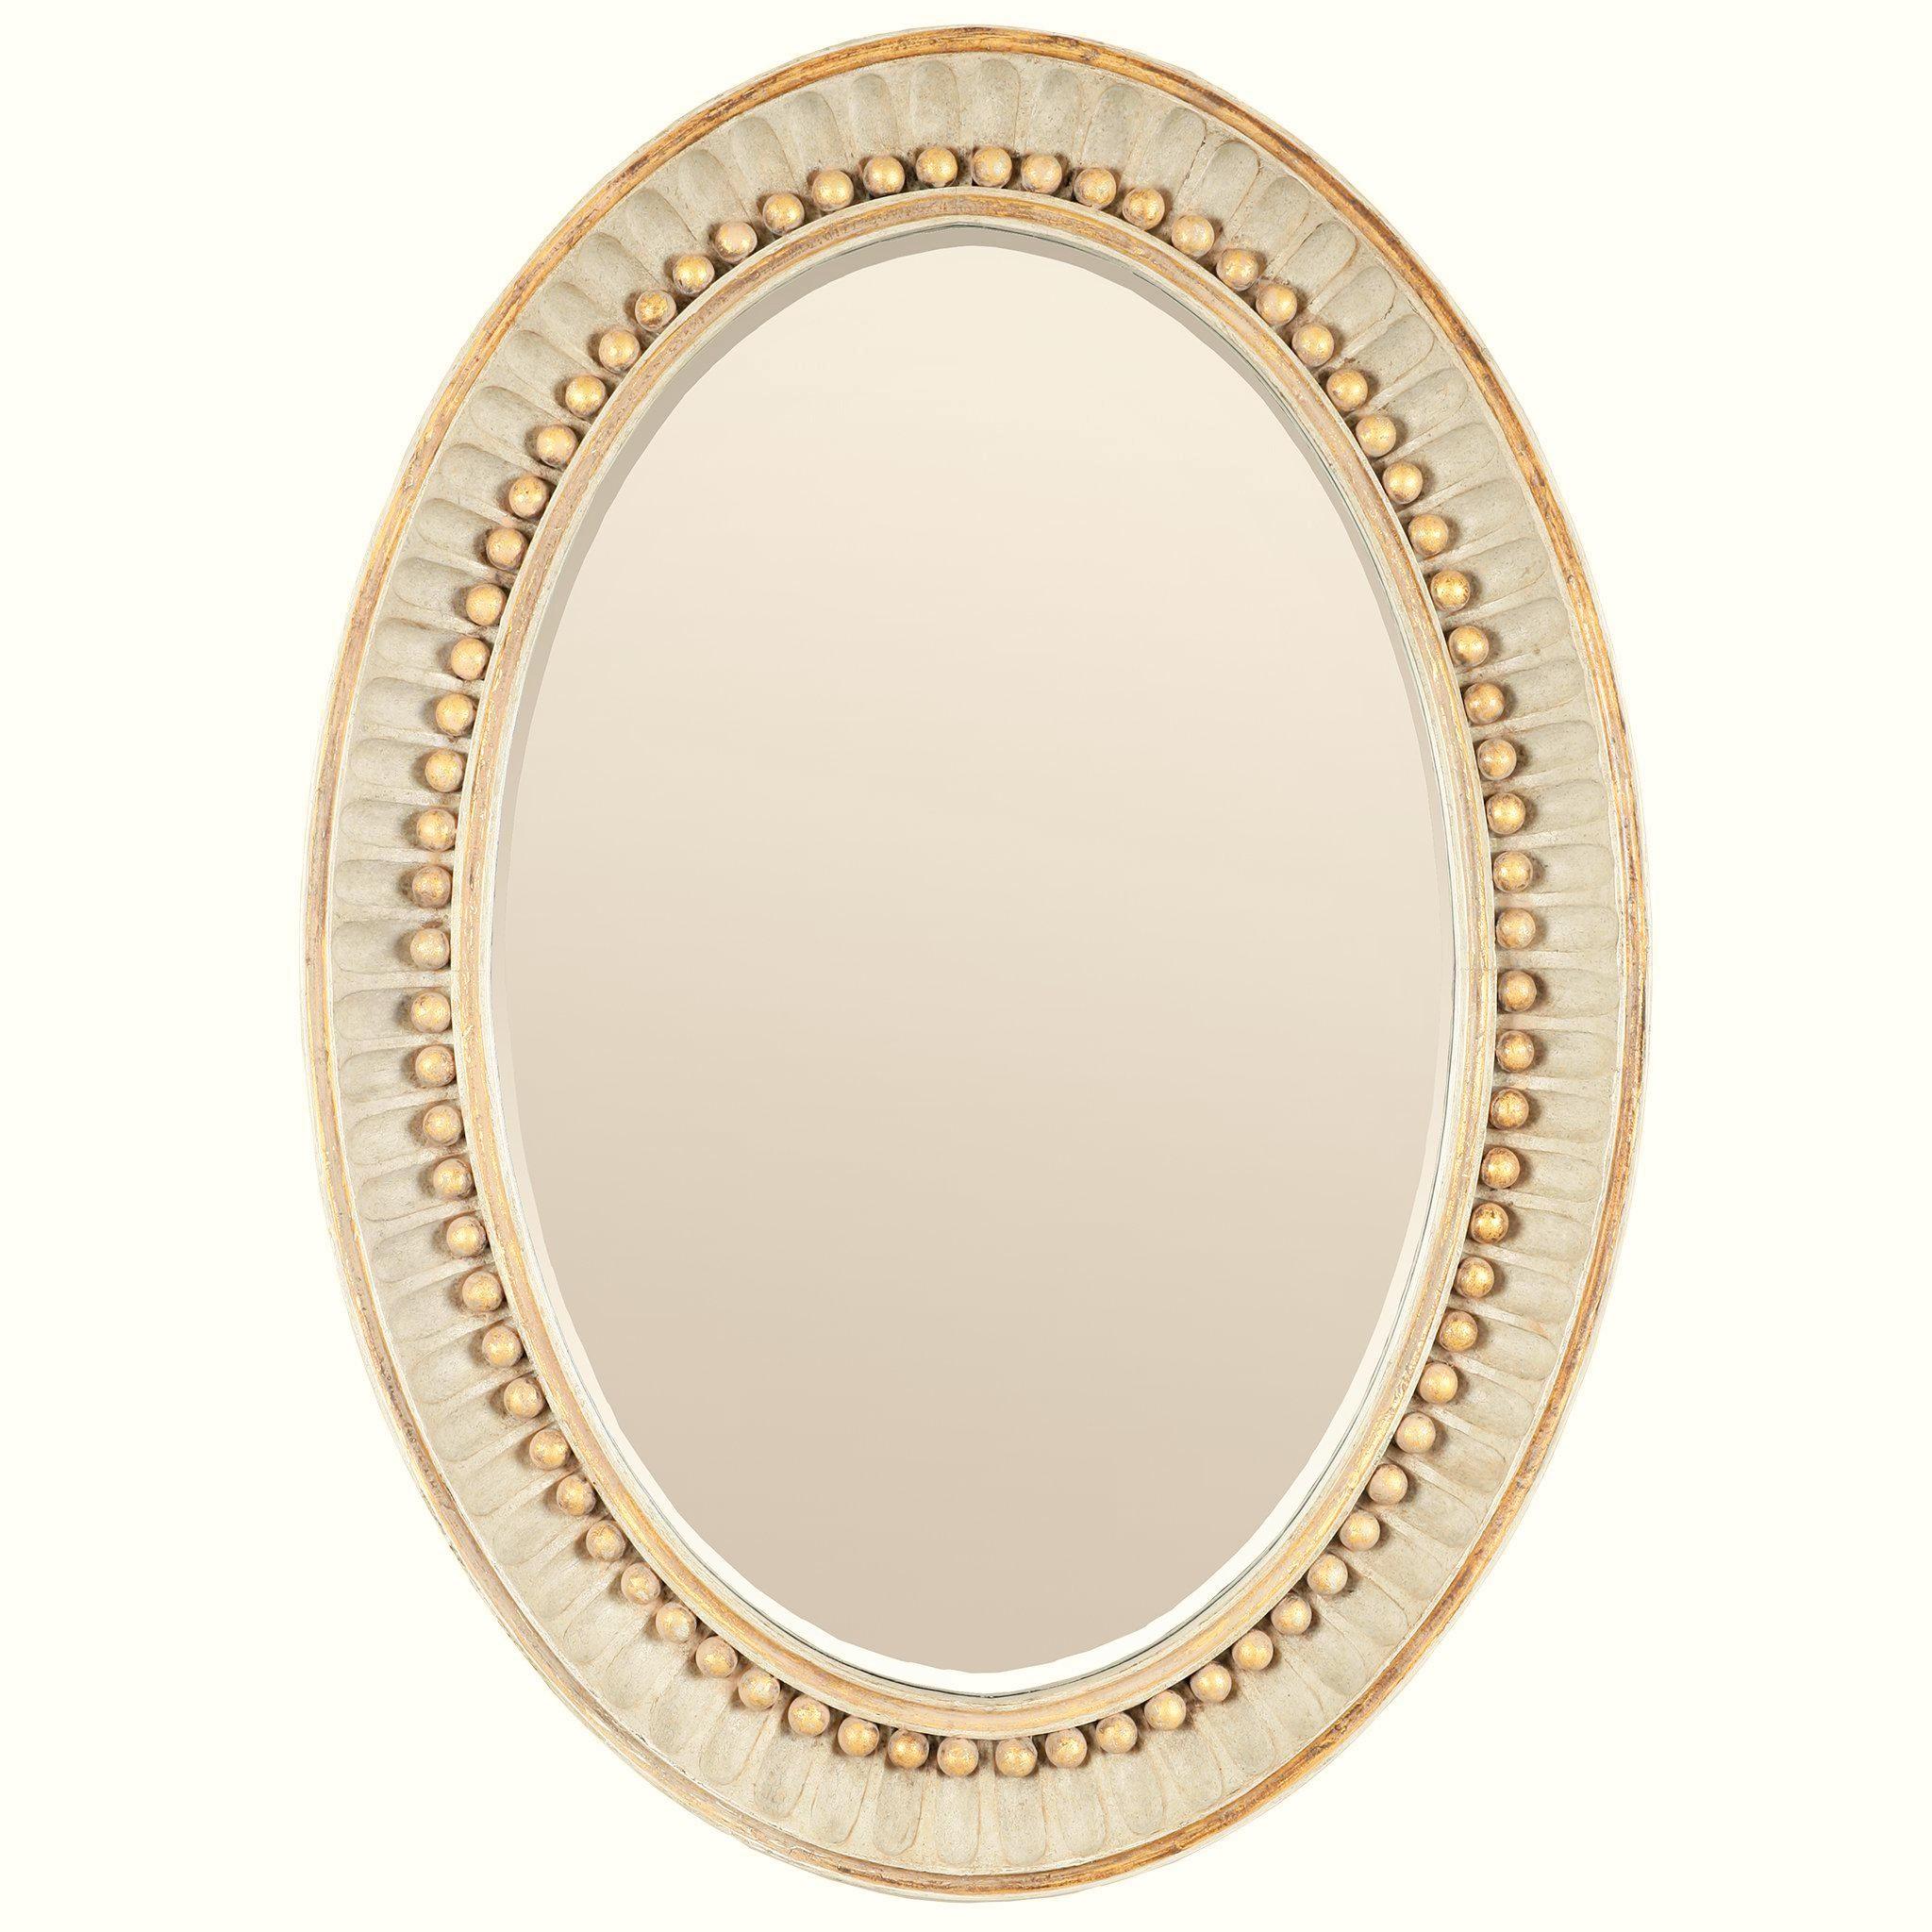 Gustavian Pair of Swedish Empire Neoclassical Oval Mirrors by Charles Pollock for William